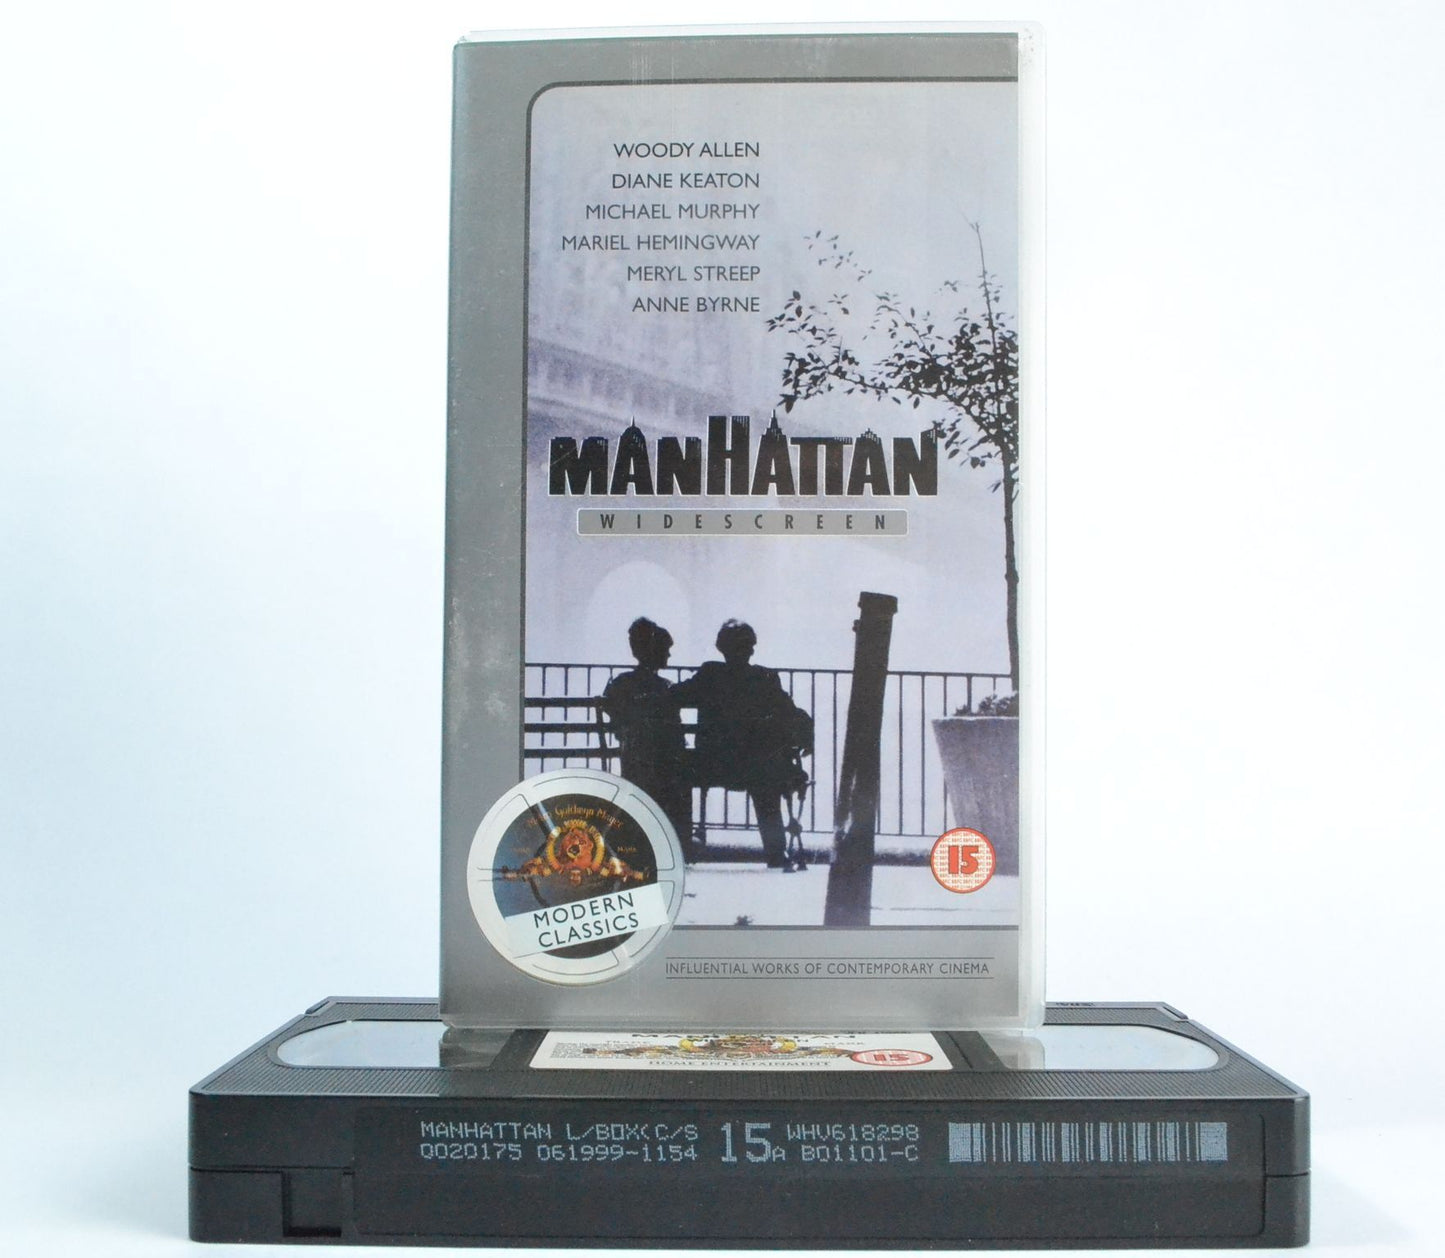 Manhattan: Widescreen - Woody Allen (1979) Special Edition - NY Comedy - VHS-